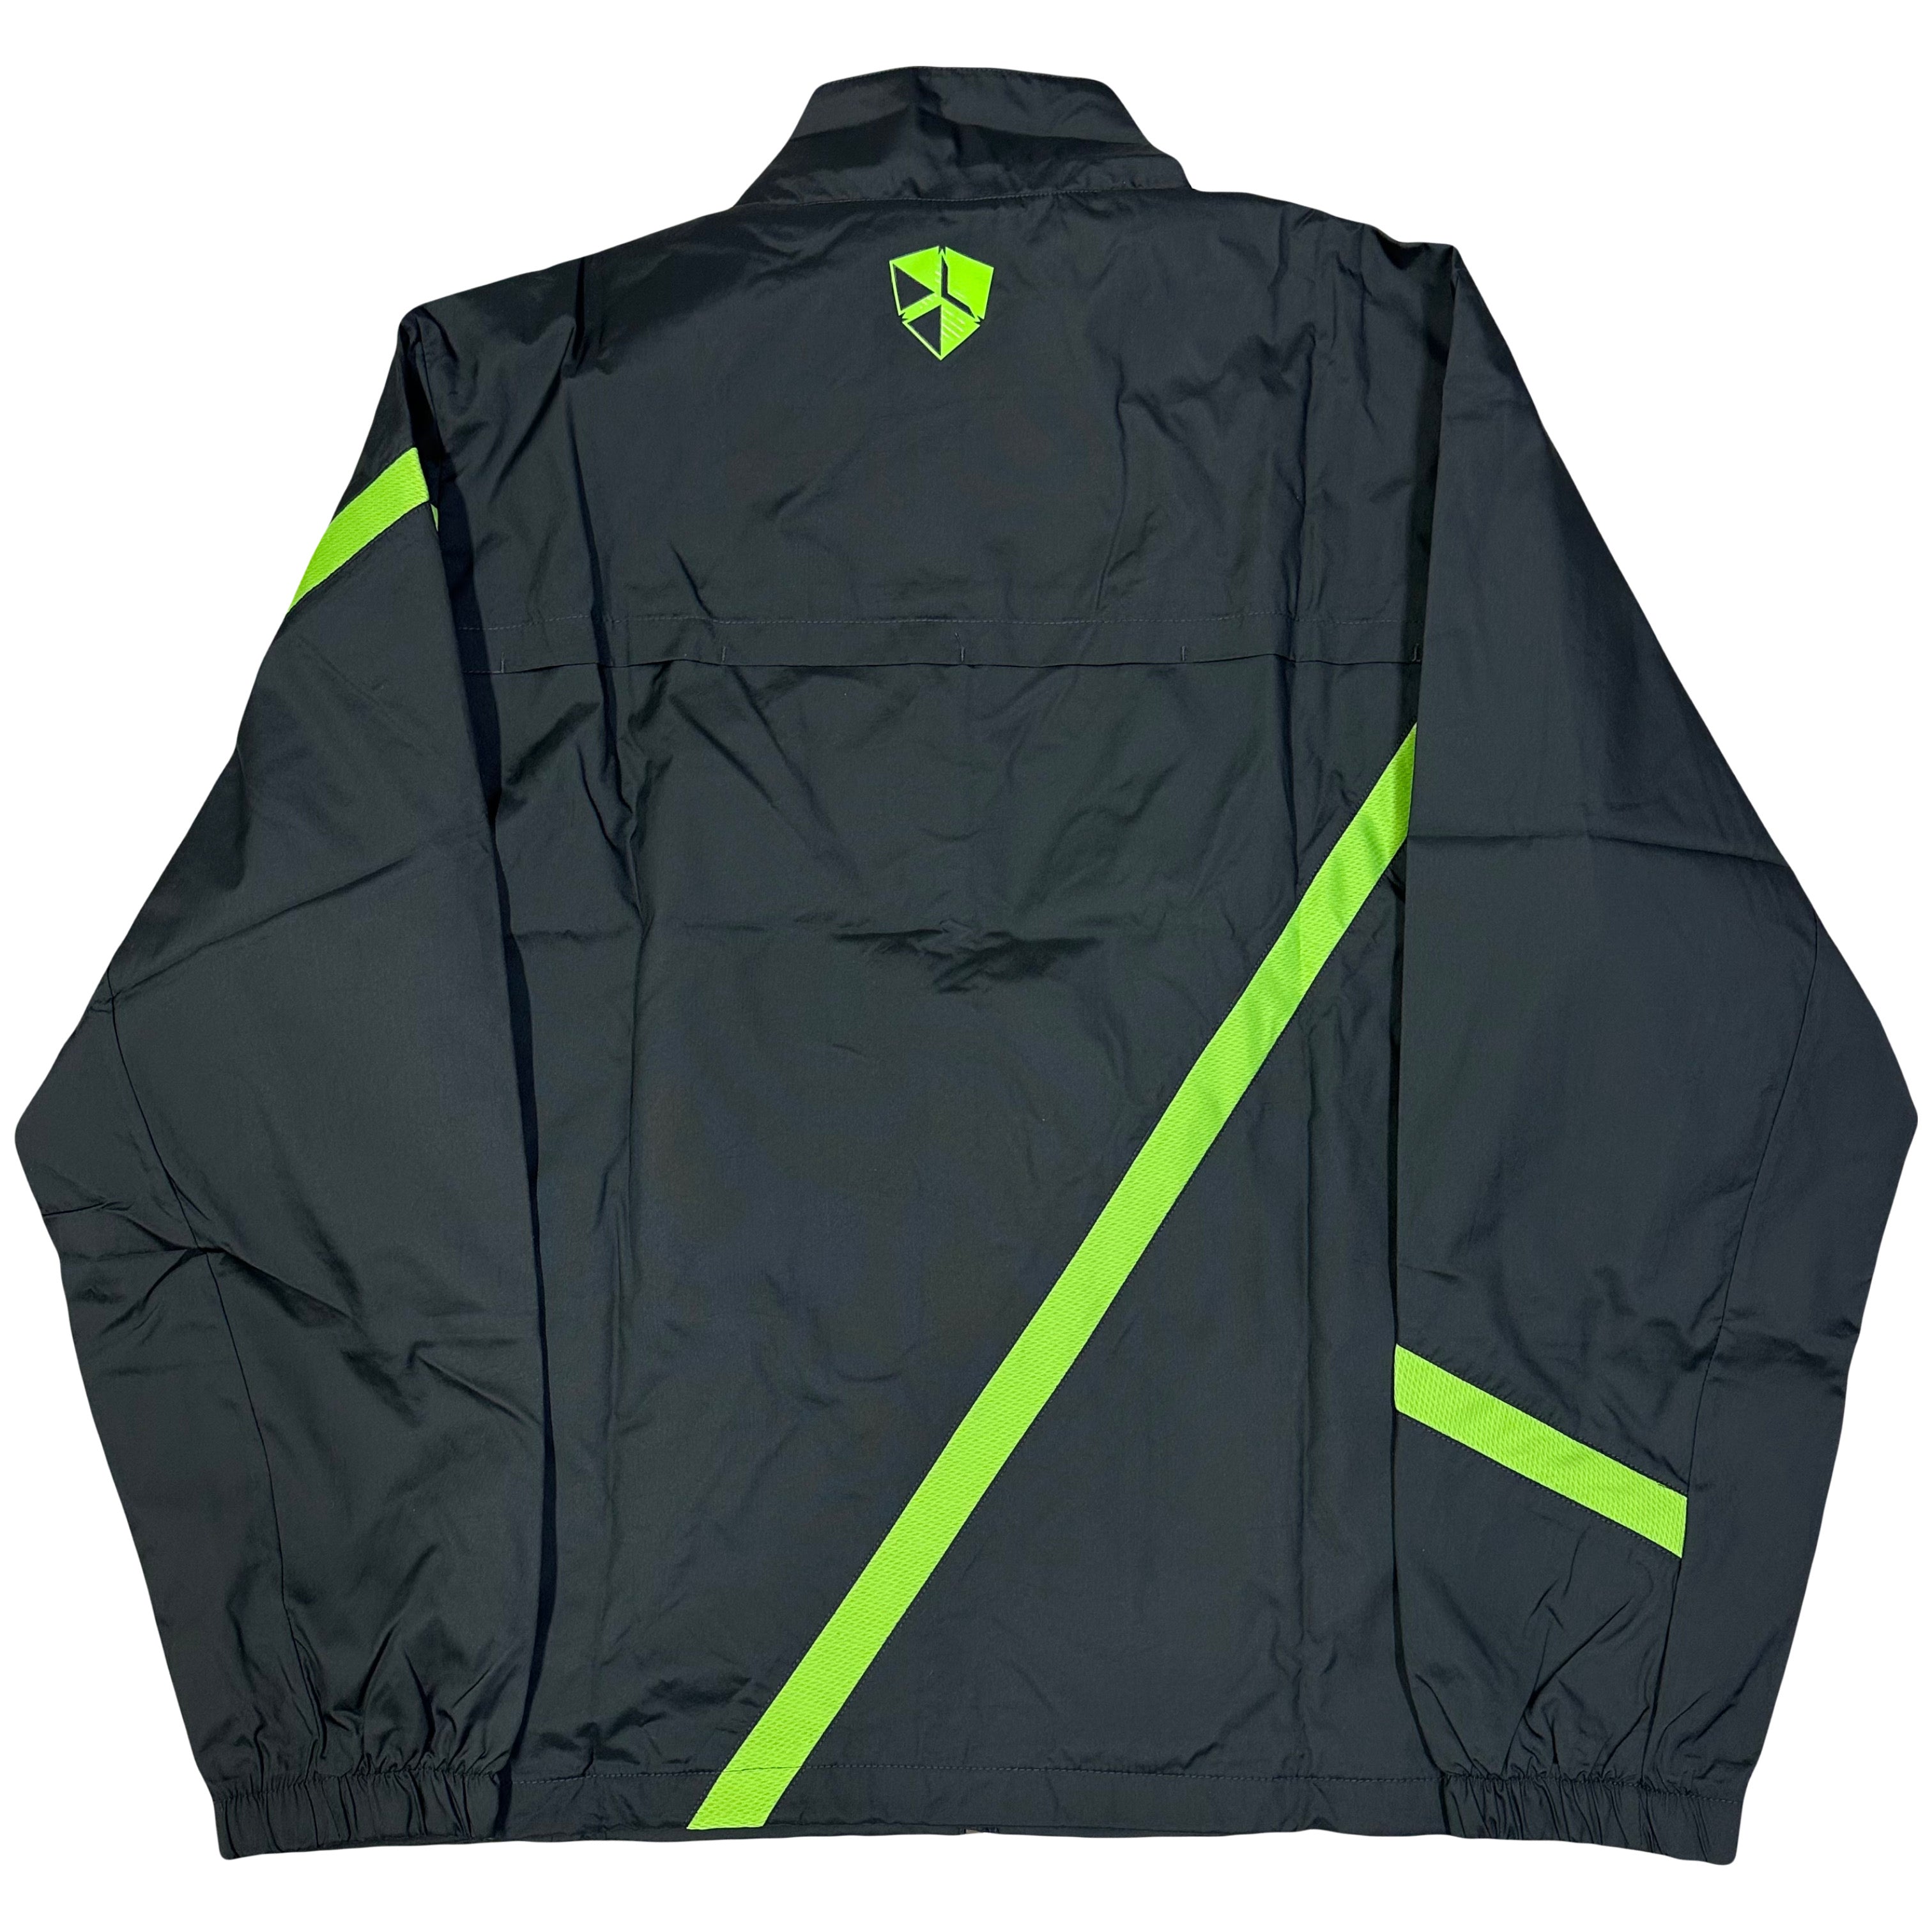 Nike Portugal 2011/12 Tracksuit In Black & Green ( XL )